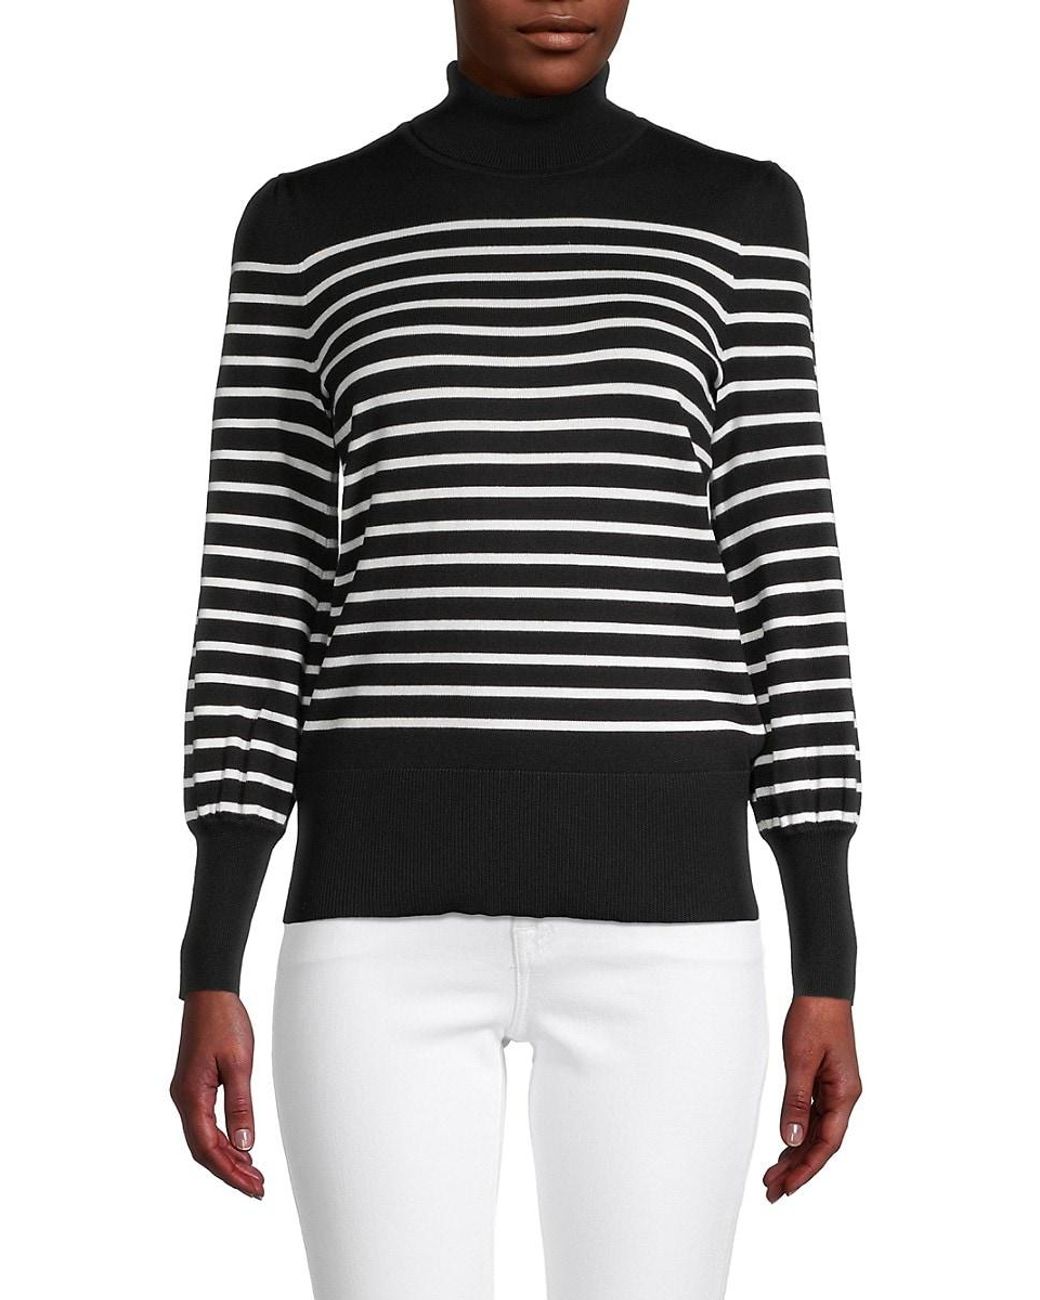 Cable & Gauge Striped Turtleneck Sweater in Black | Lyst